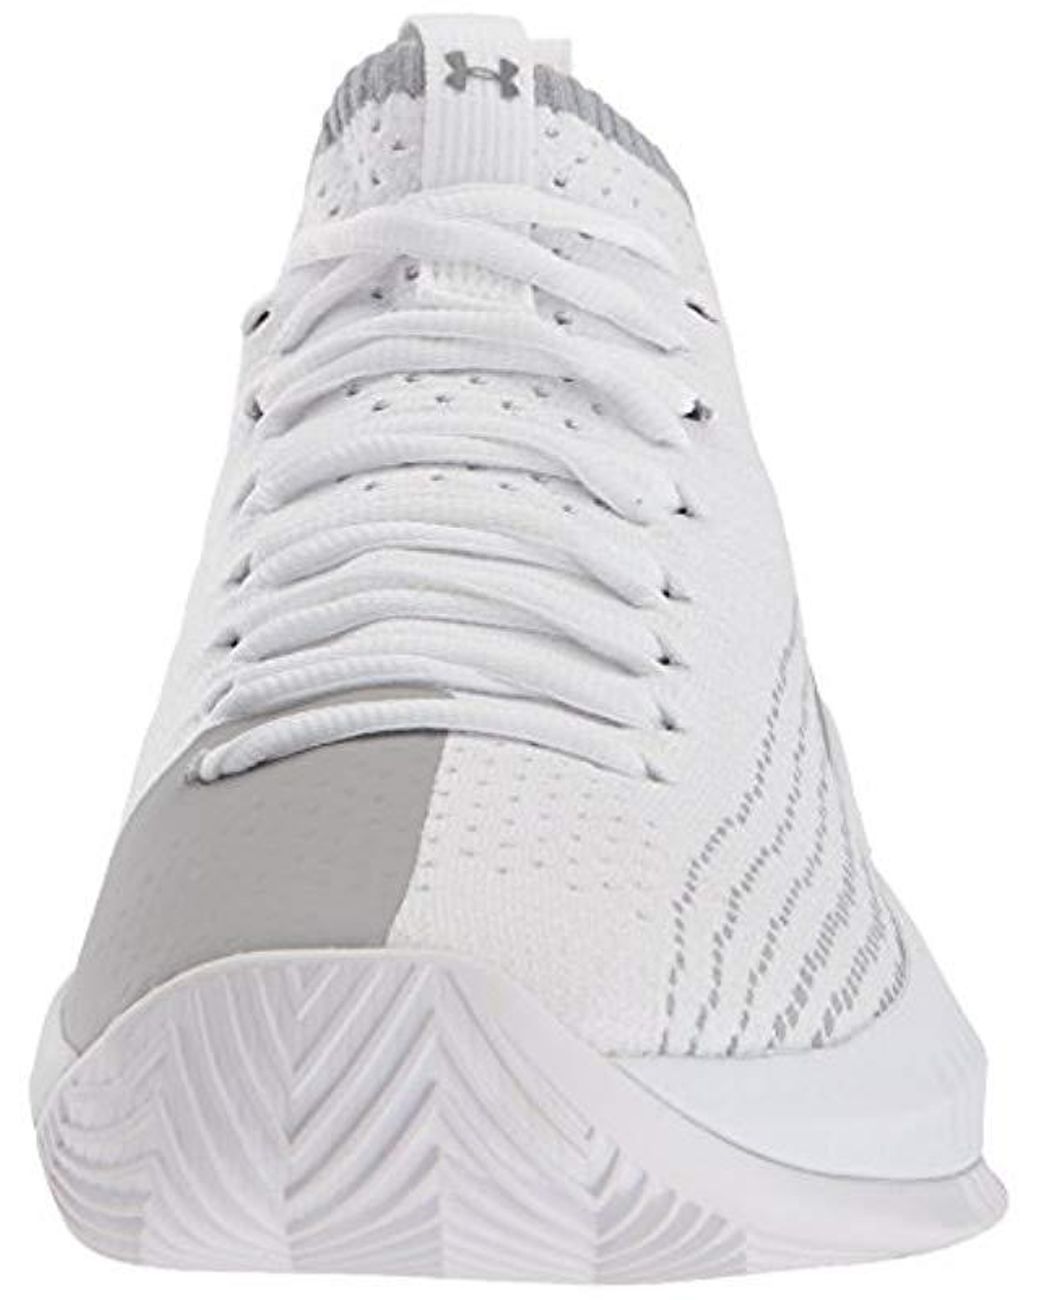 Under Armour Ua Heat Seeker Basketball Shoes in White for Men | Lyst UK